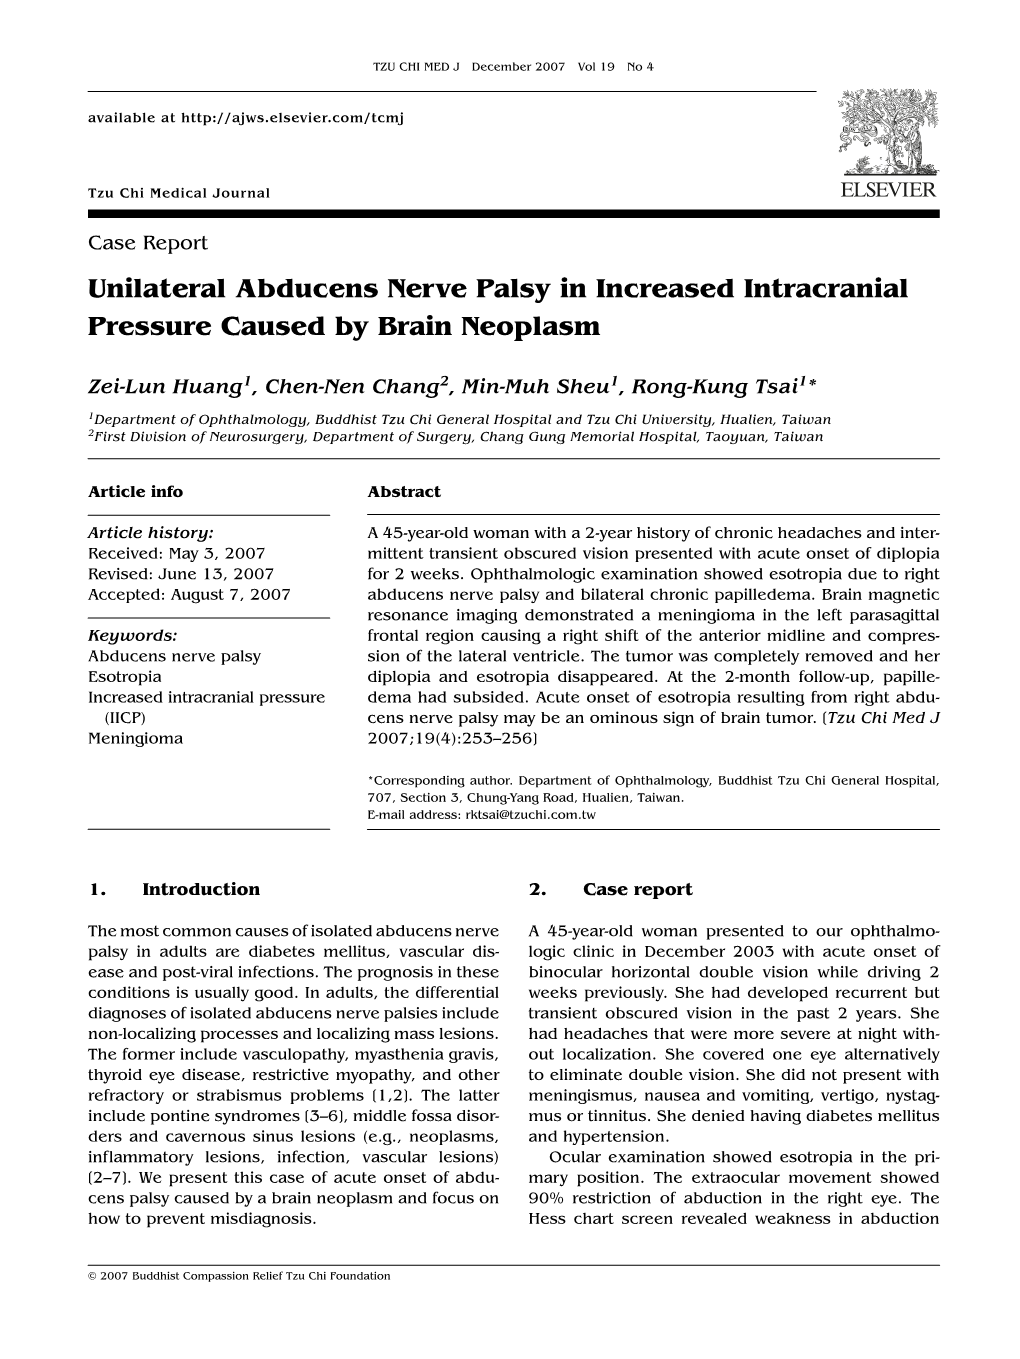 Unilateral Abducens Nerve Palsy in Increased Intracranial Pressure Caused by Brain Neoplasm